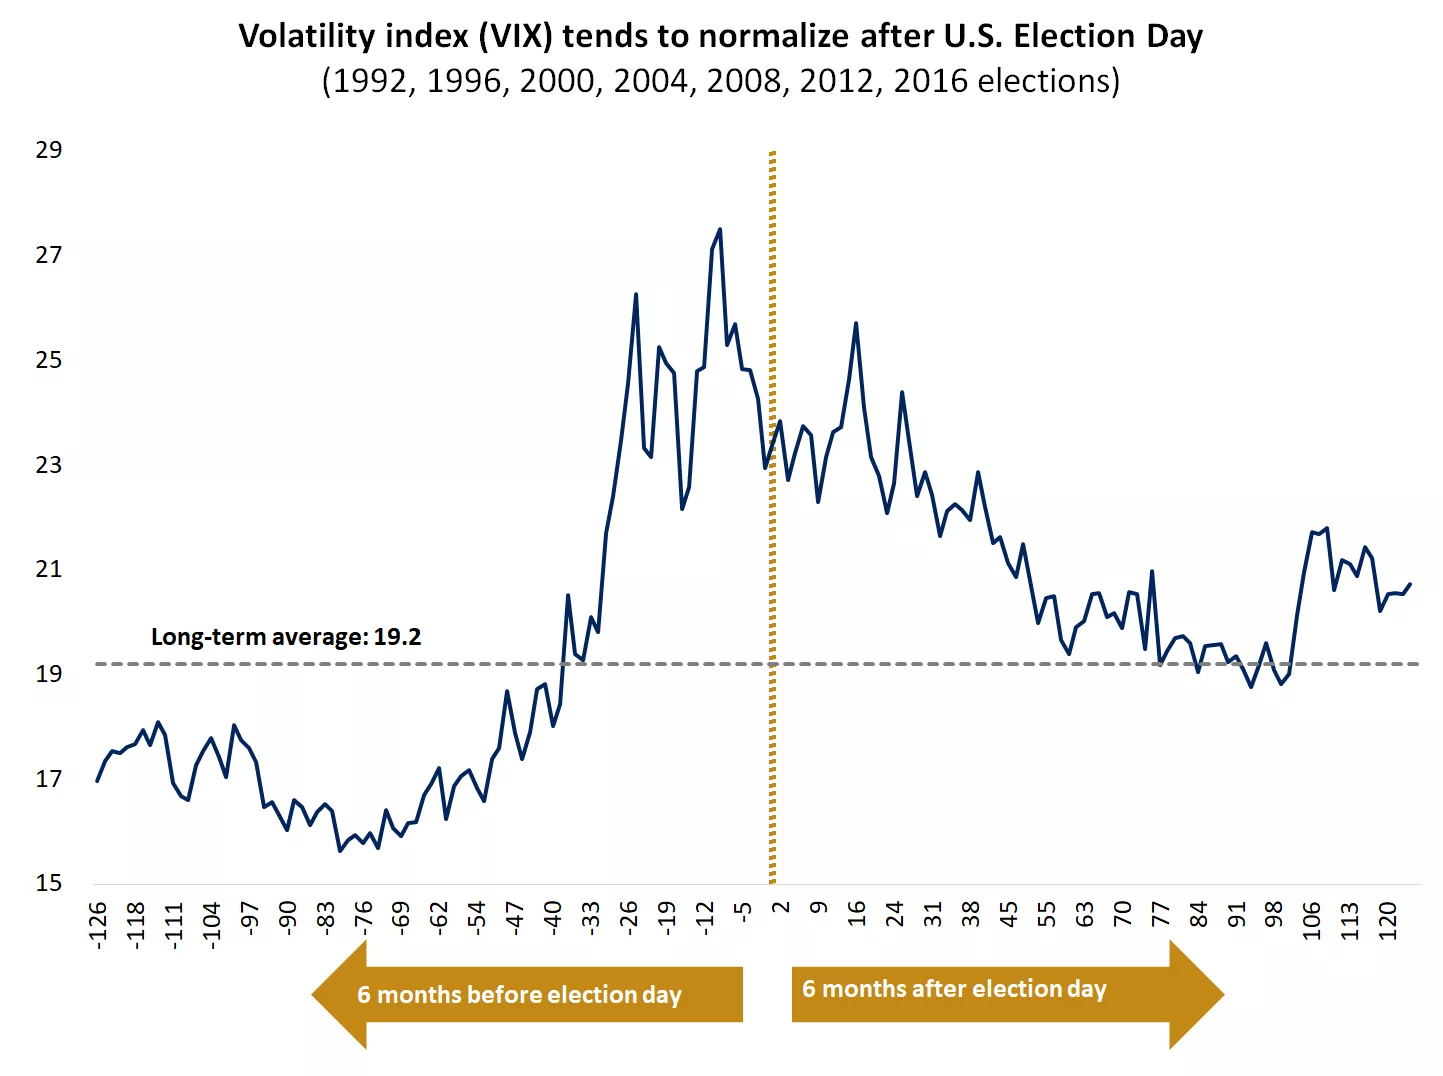  This chart shows the level of the VIX index 6 months before and after U.S. election day since 1992.
